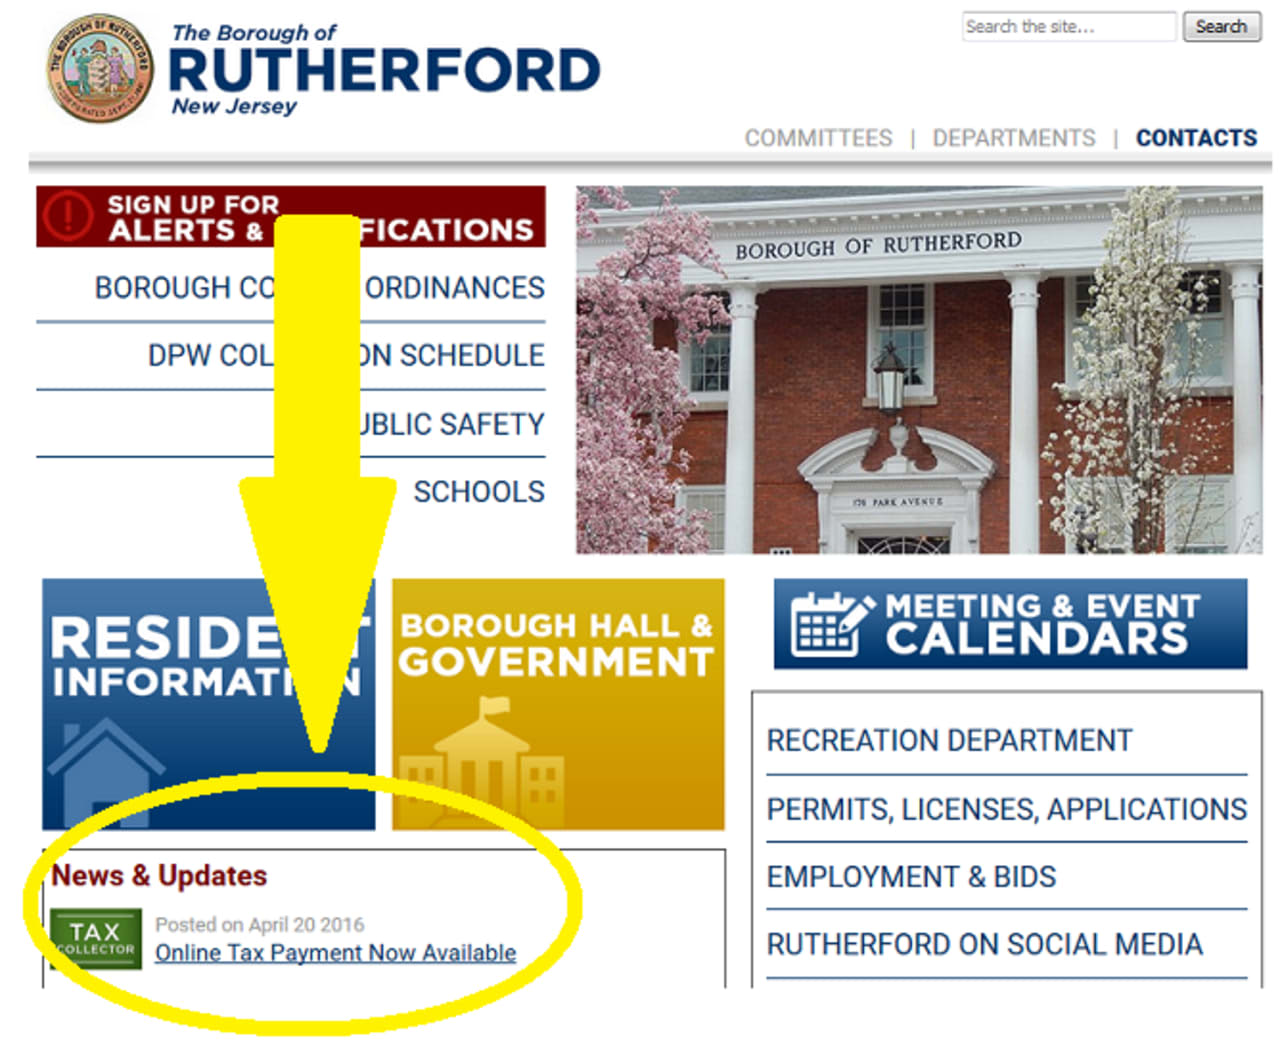 The Borough of Rutherford is now taking tax payments online.